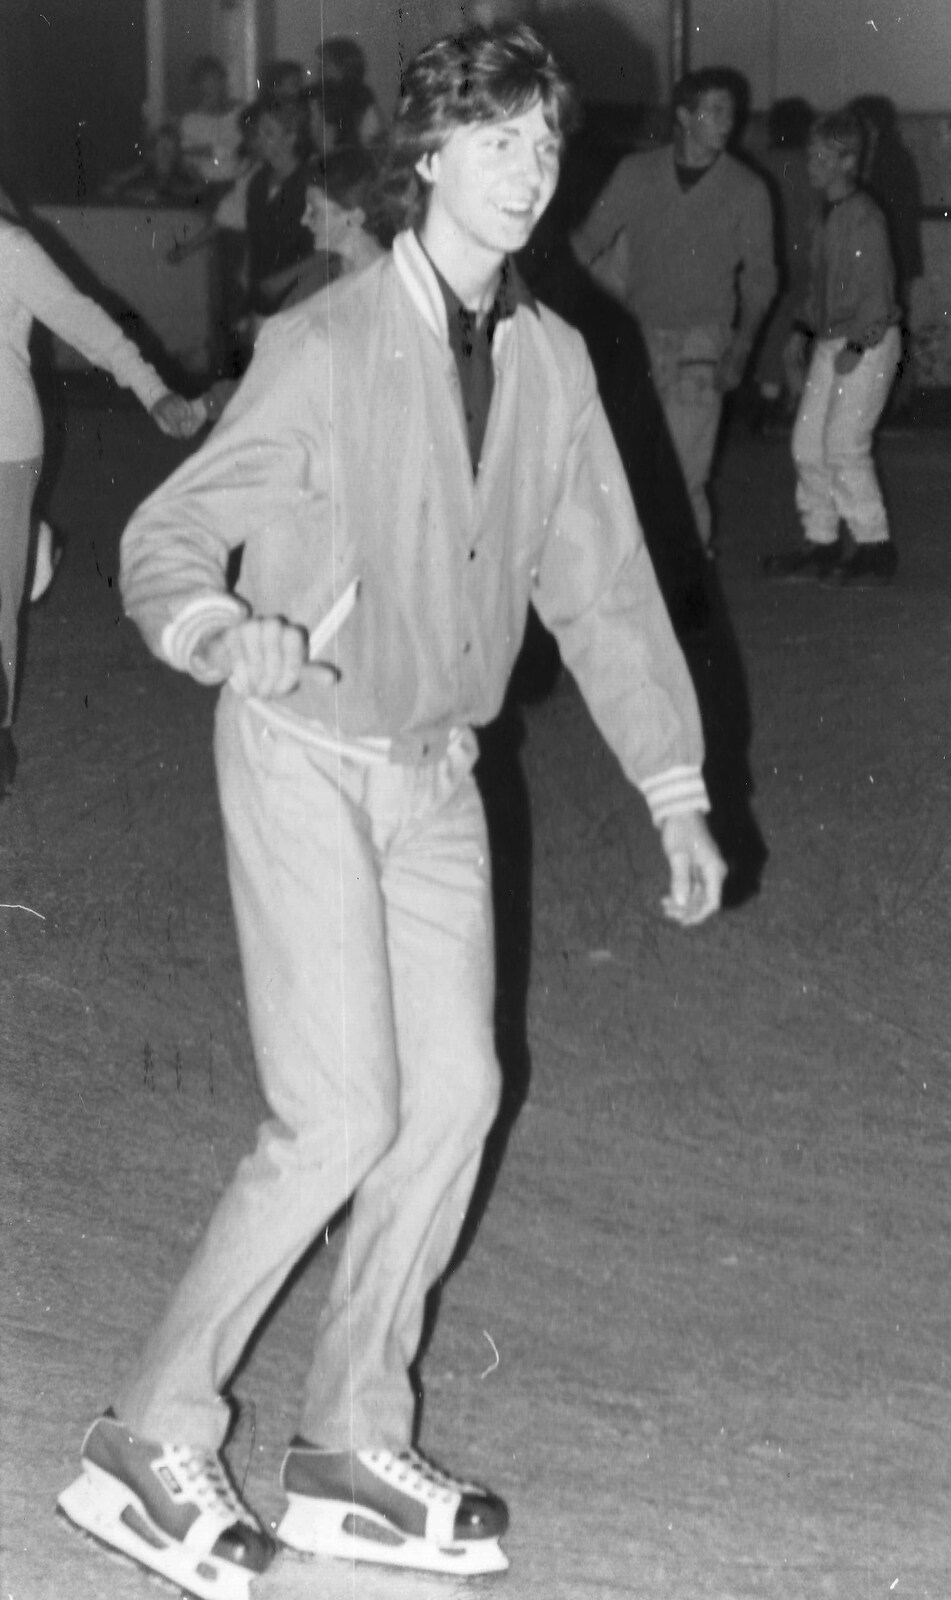 Sean skates around at Westover Ice Rink in Bournemouth from The New Forest Marathon and Other Randomness, New Milton, Hampshire - 15th September 1985